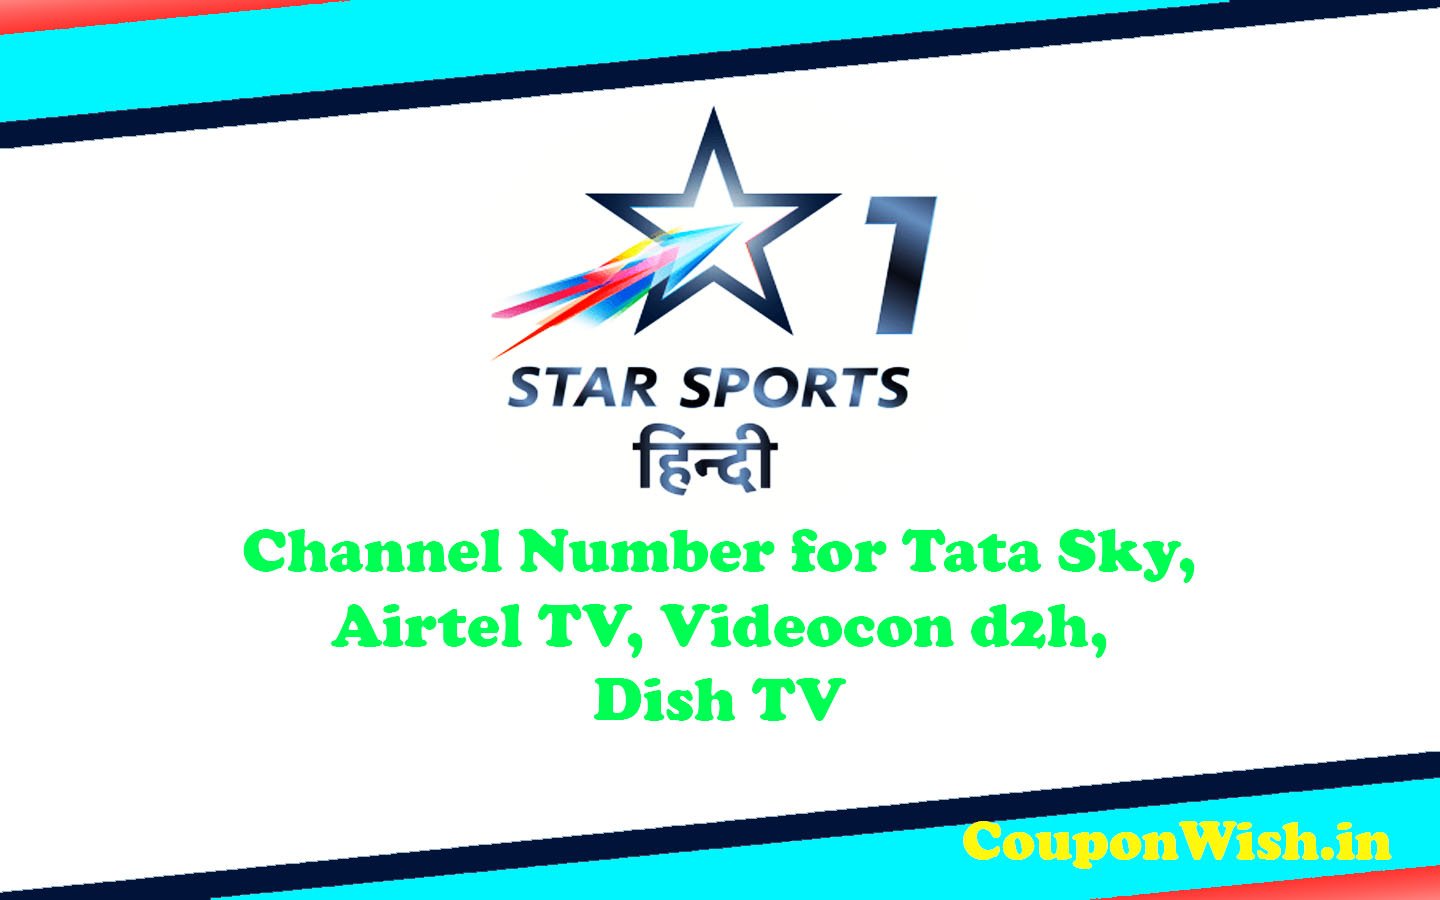 Star Sports Channel Number for Tata Sky, Airtel TV, Videocon d2h, Dish TV